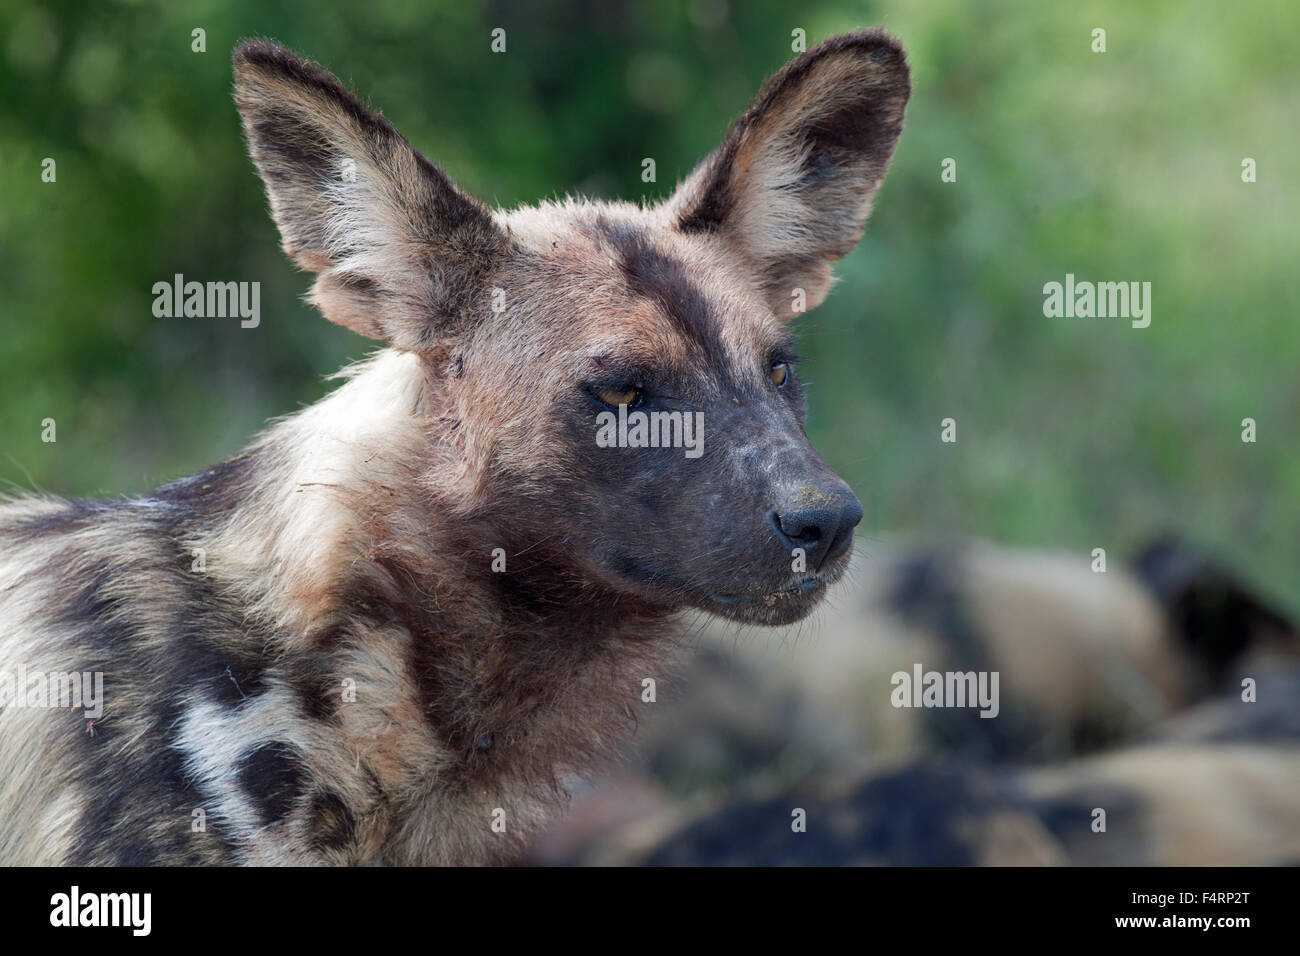 African wild dog or African painted dog (Lycaon pictus), portrait, Kruger National Park, South Africa Stock Photo